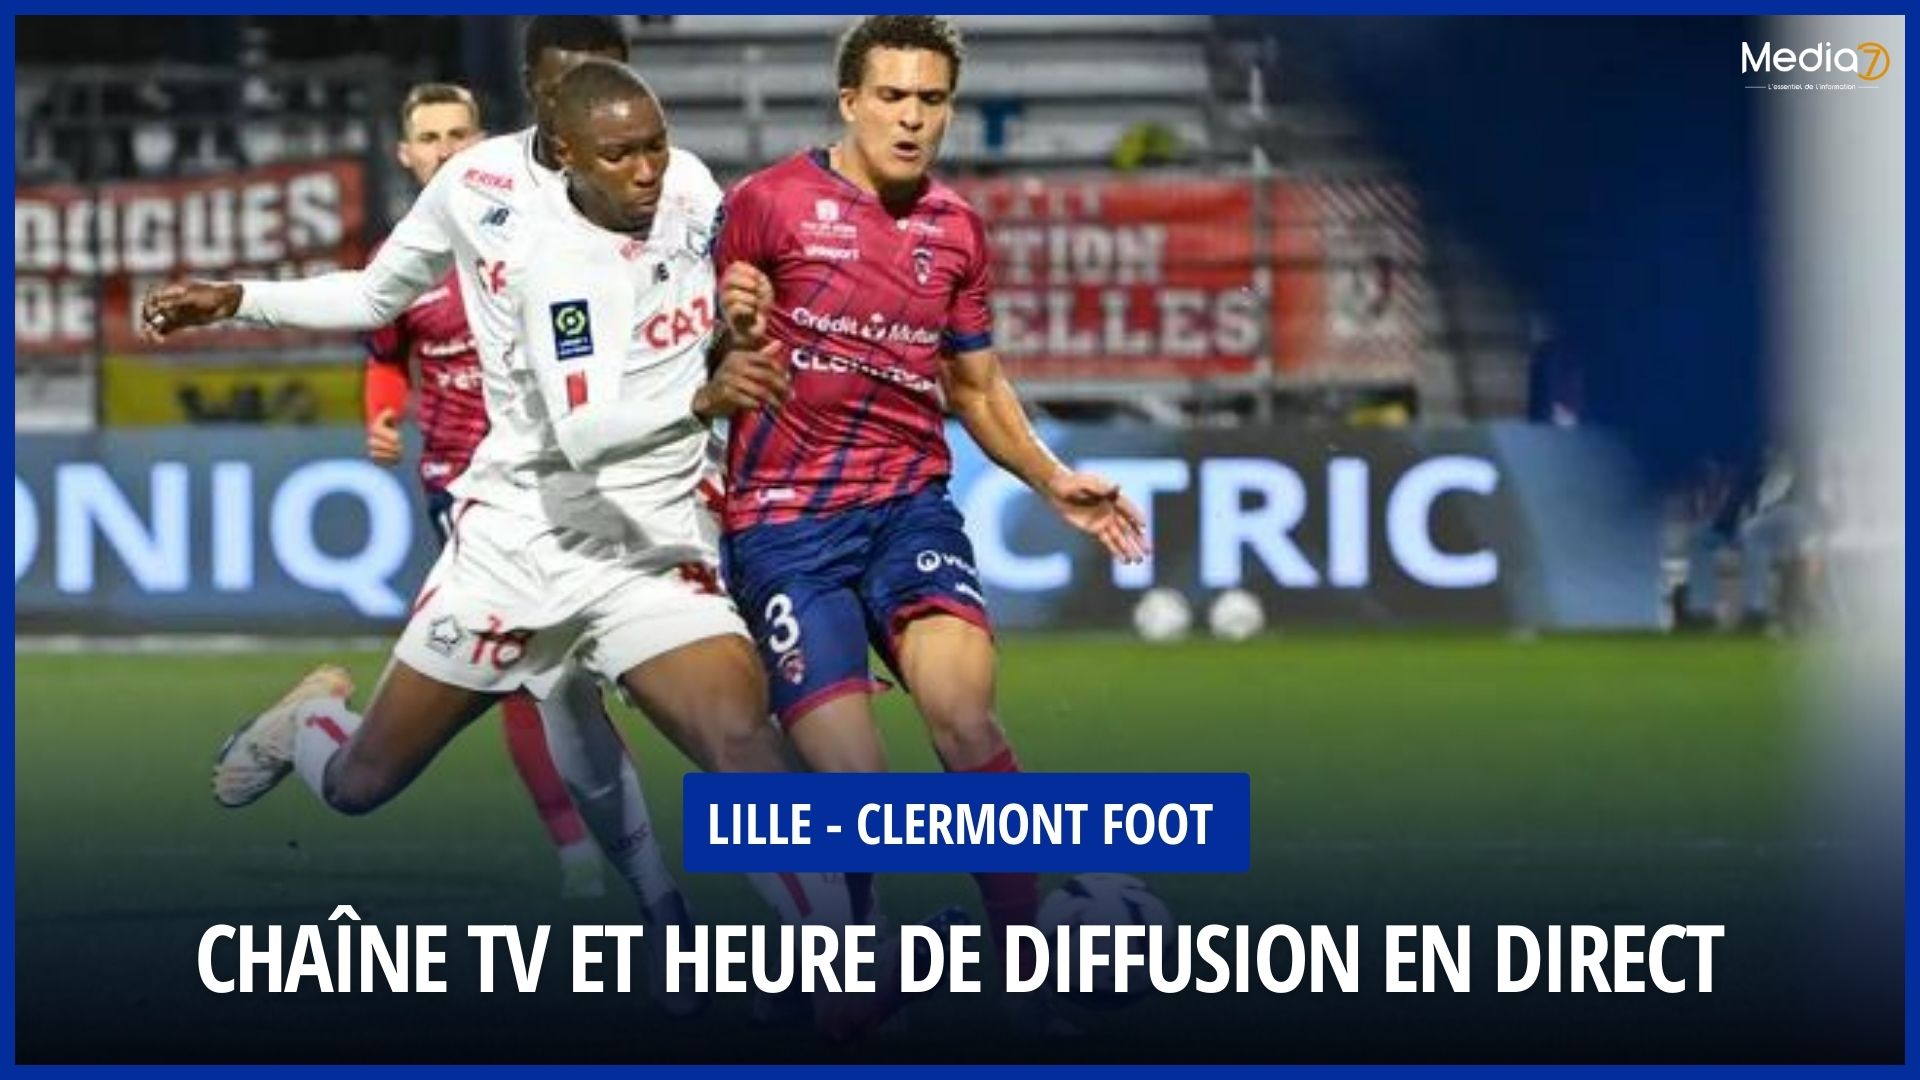 Live broadcast of the Lille - Clermont Foot match: Schedule, TV Channels and Streaming - Media7